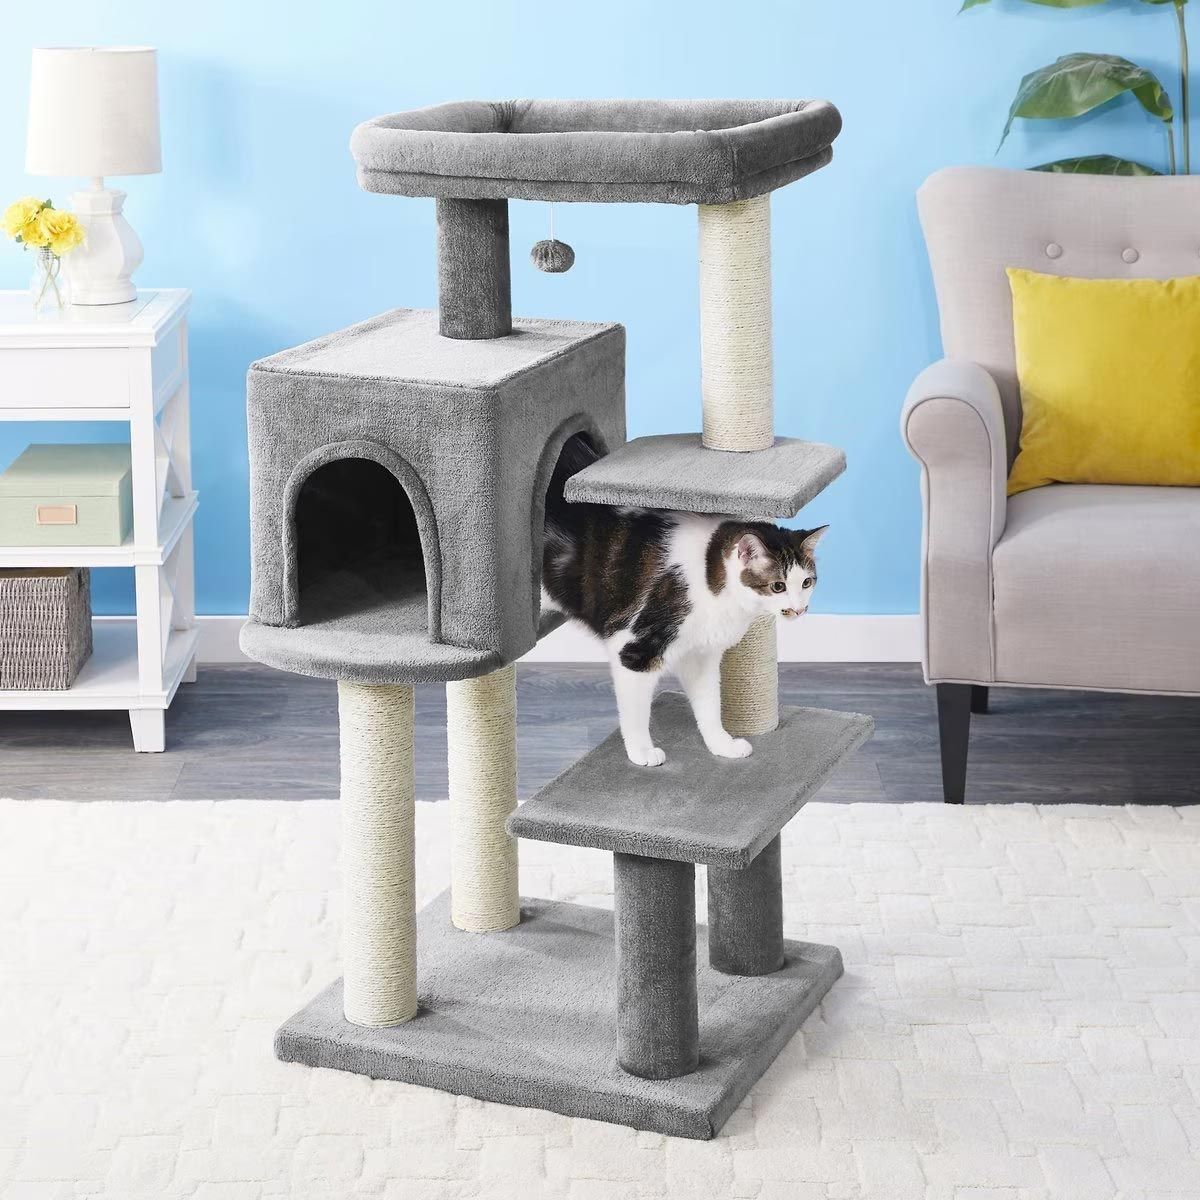 a cat is standing on a cat tree in a living room